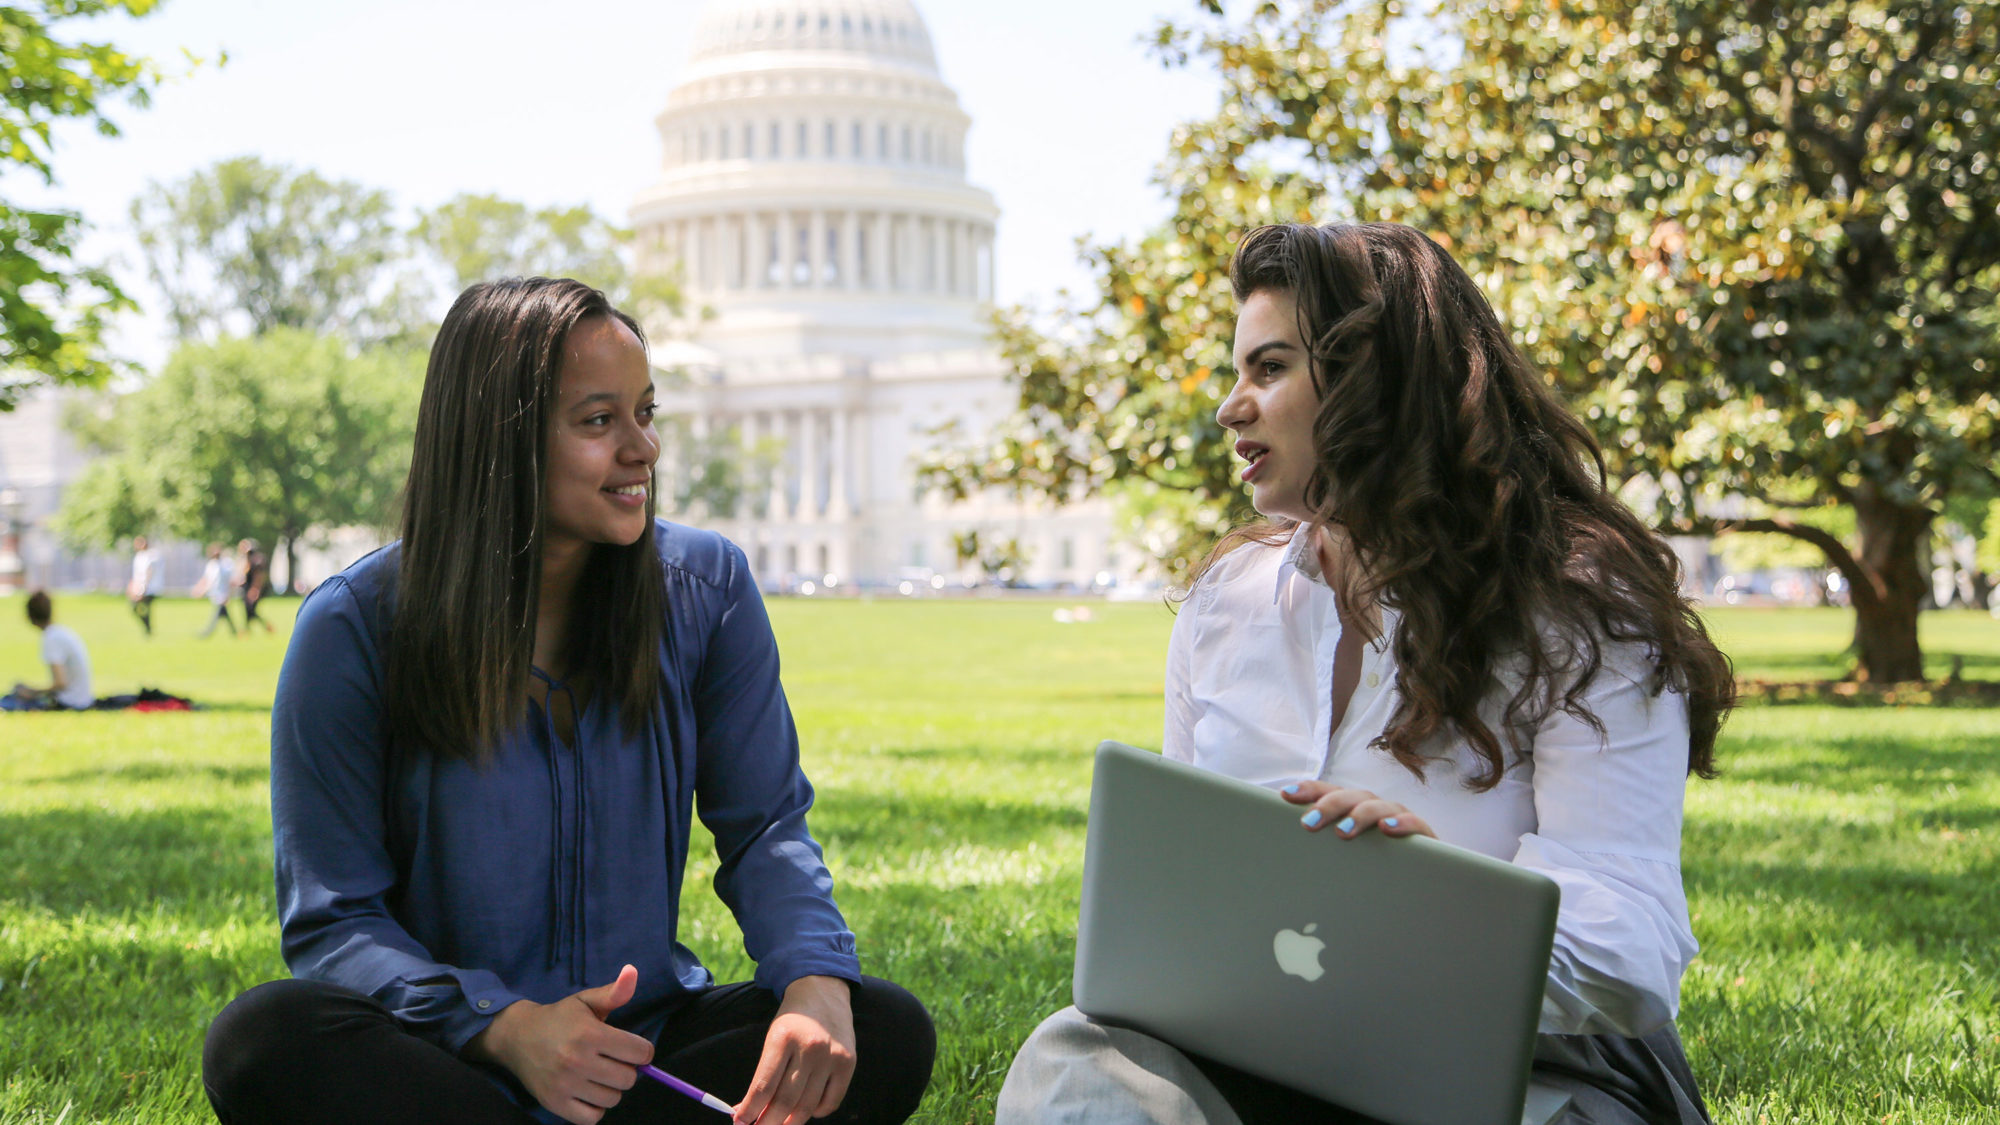 Two students work on laptops next to the Capitol Building.